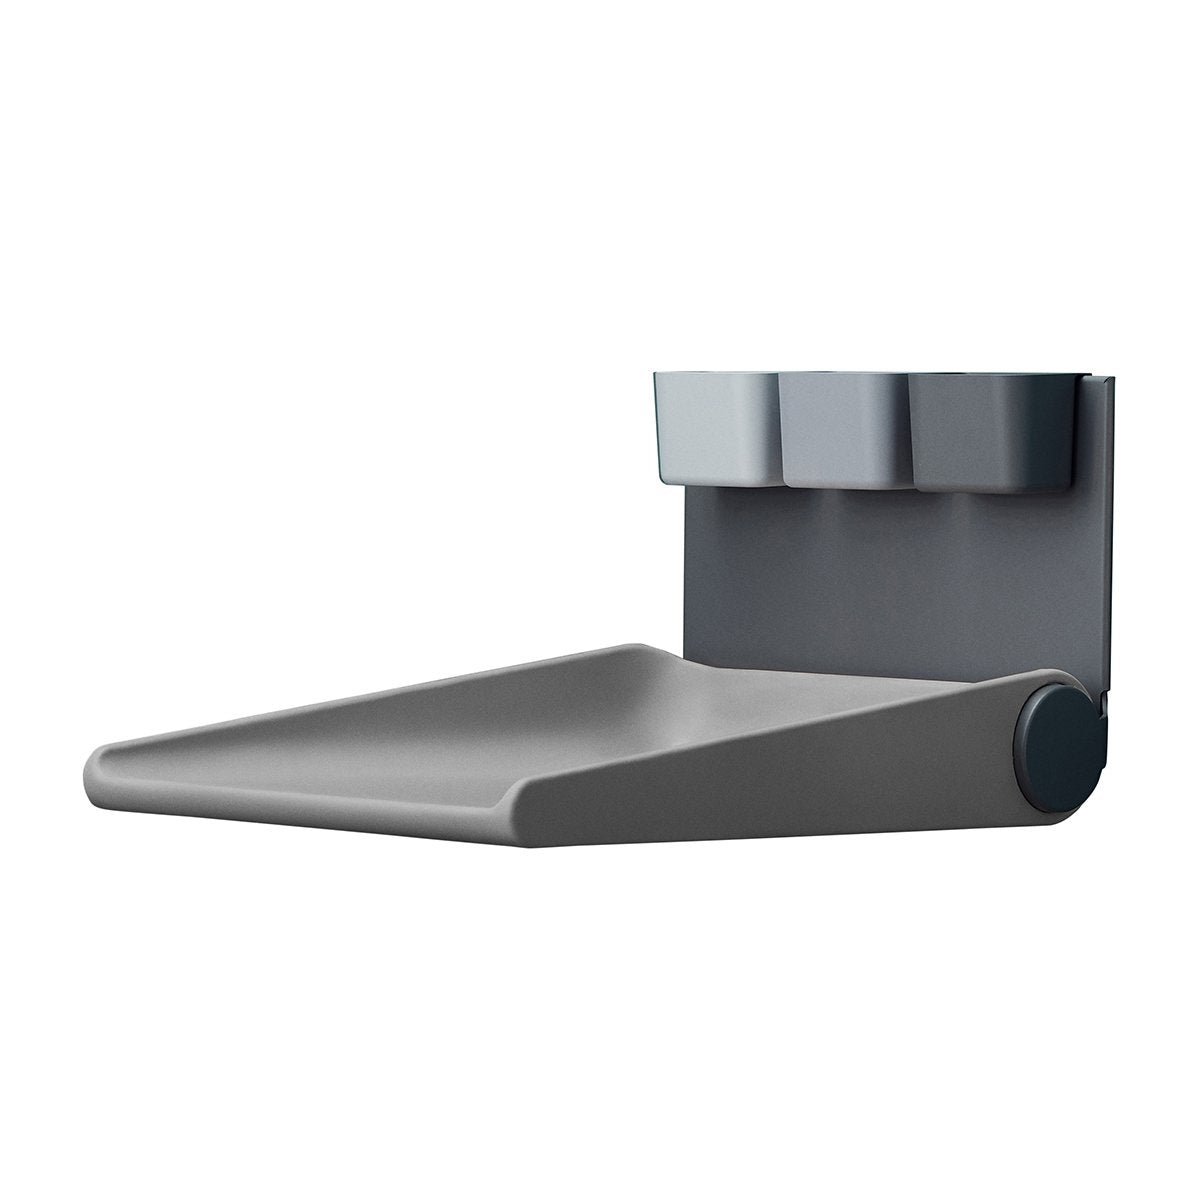 Leander Wally ™ - changing table mounted on the wall, Dusty Gray